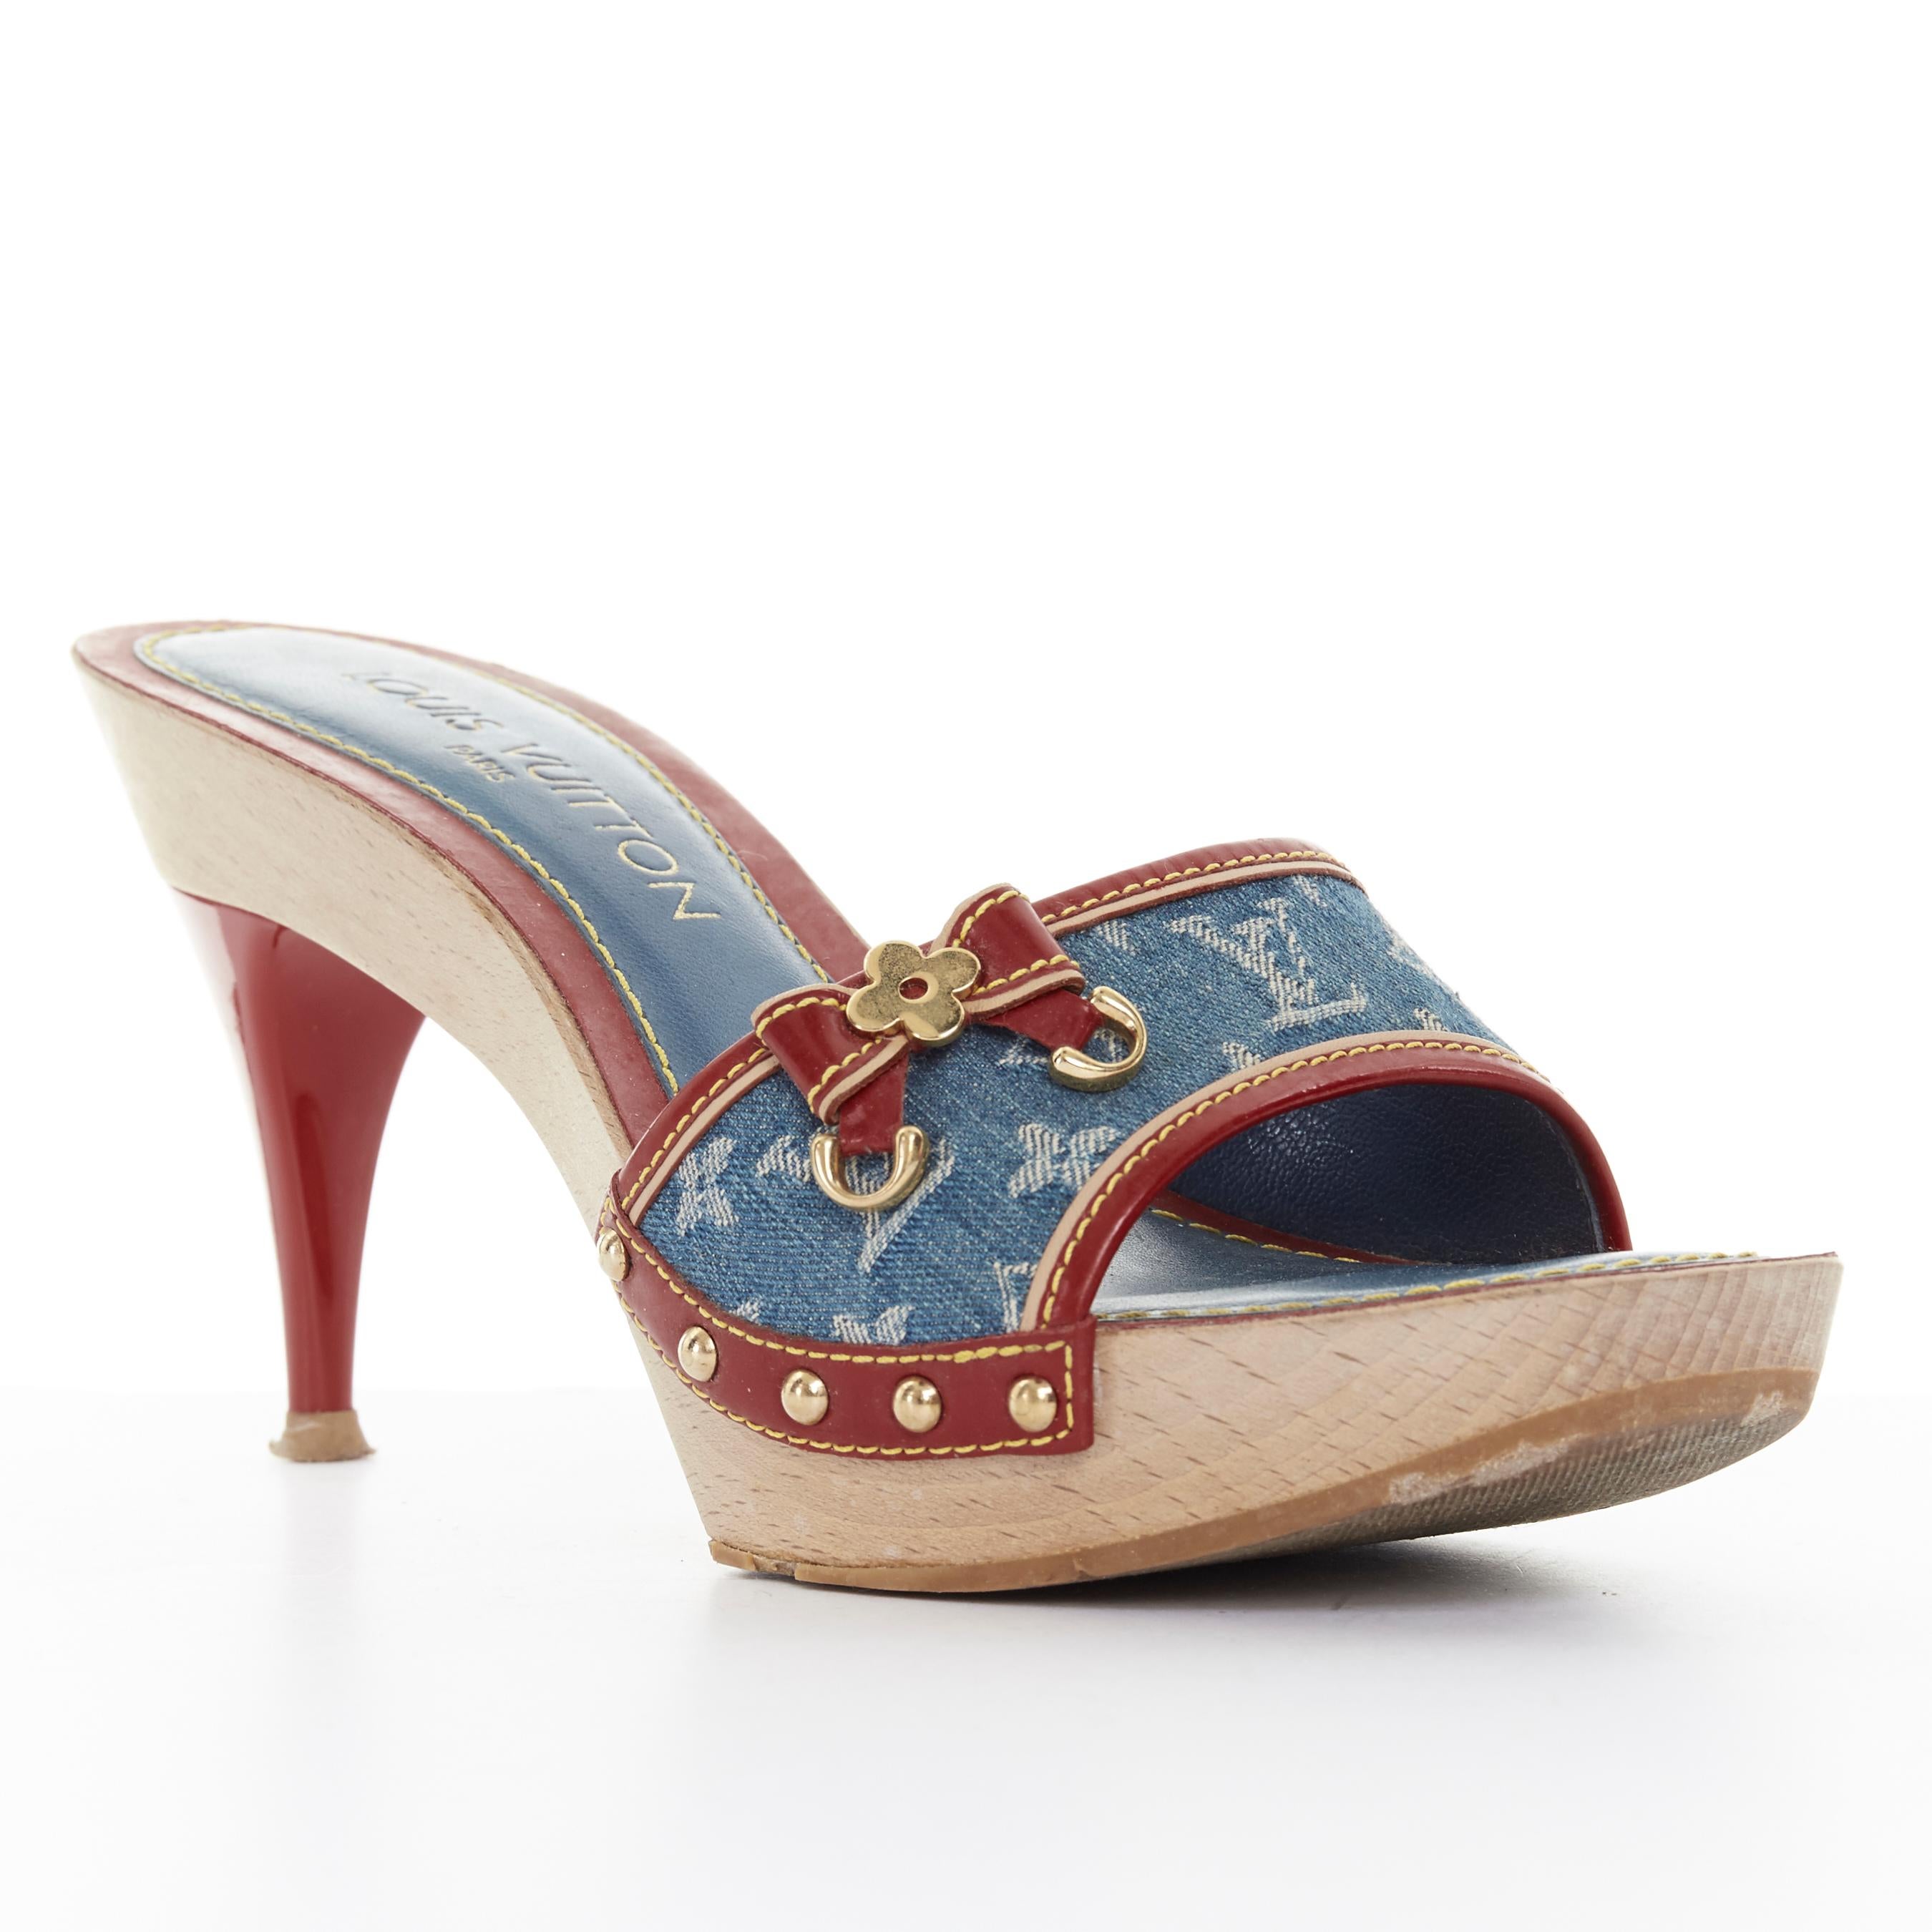 LOUIS VUITTON LV monogram blue denim red bow patent wooden clog sandals EU36 Reference: TGAS/A02988 
Brand: Louis Vuitton 
Model: Clog 
Material: Fabric 
Color: Blue 
Pattern: Other 
Extra Detail: Mid (22.9 in) heel height. Open toe. Slim heel.